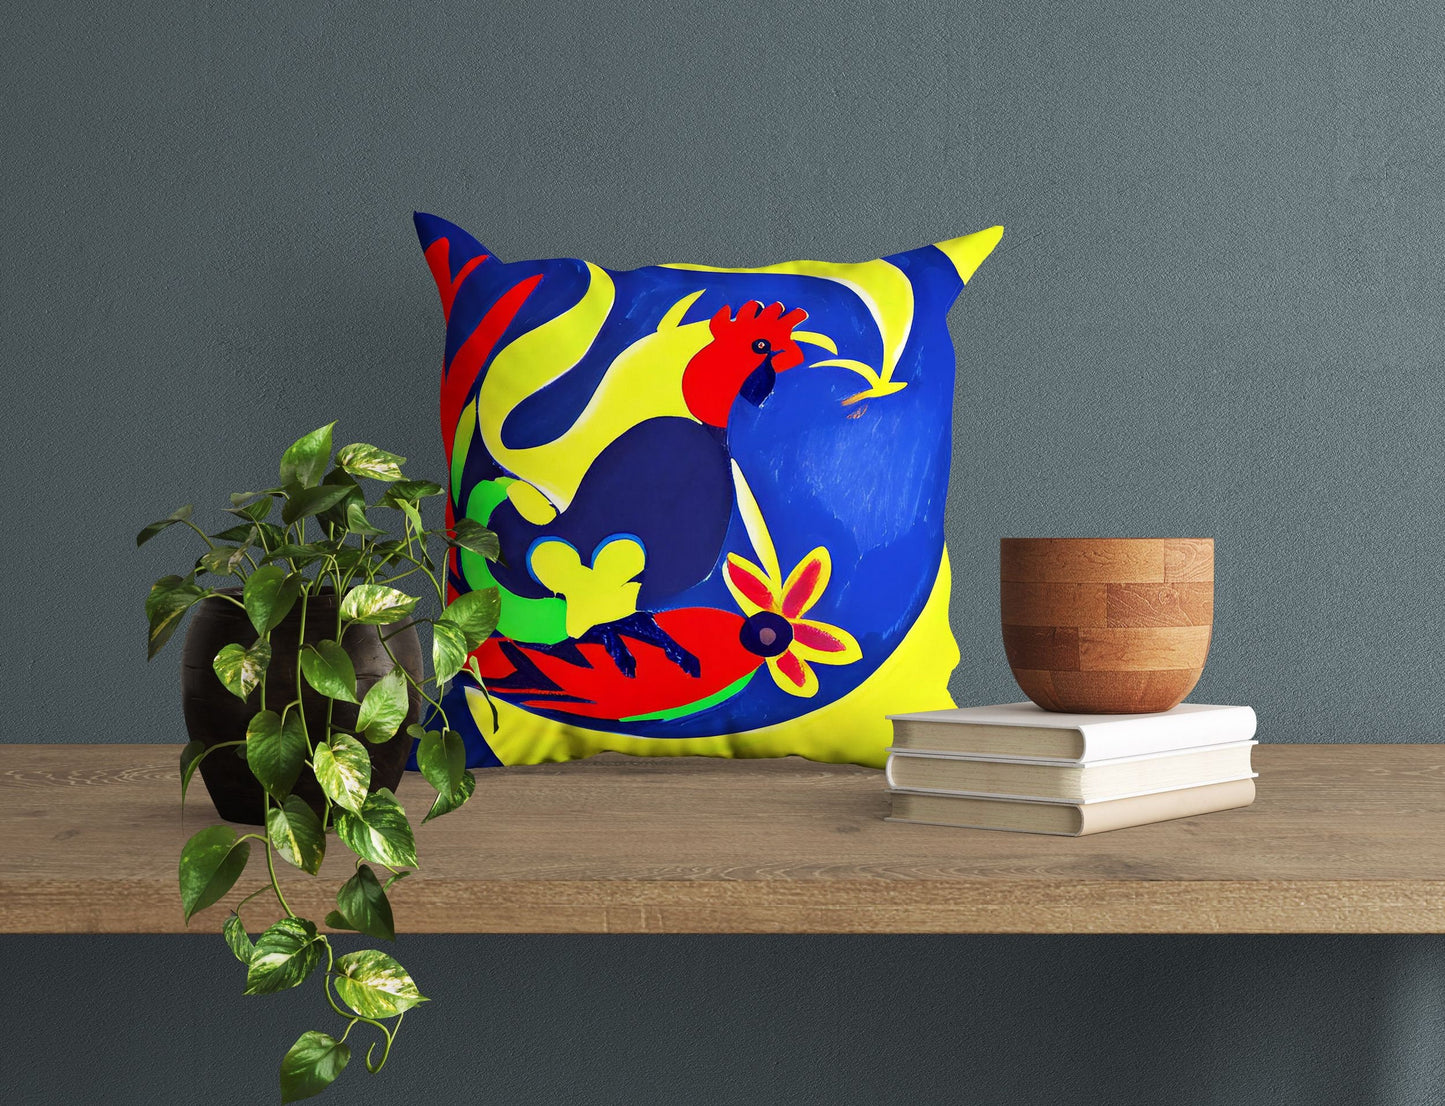 Original Art Rooster Toss Pillow, Abstract Pillow, Artist Pillow, Colorful Pillow Case, 24X24 Pillow Case, Playroom Decor, Holiday Gift